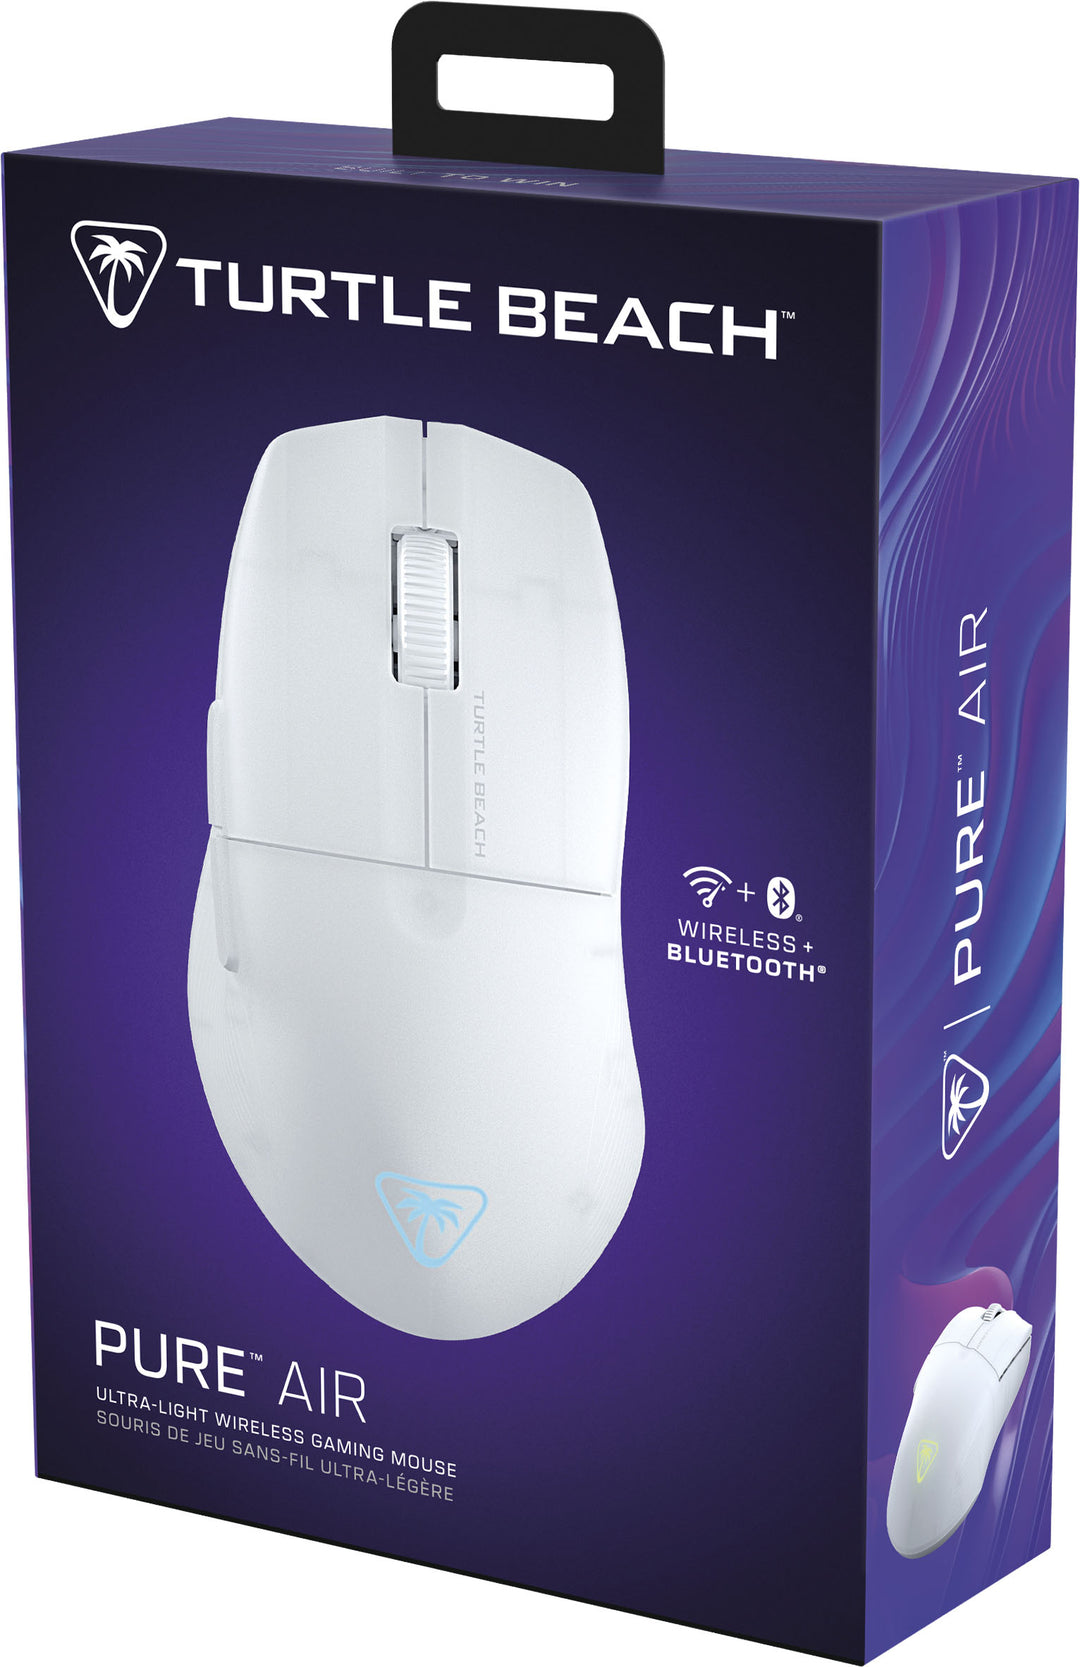 Turtle Beach - Pure Air Ultra-Light Wireless Ergonomic RGB Gaming Mouse with 26K DPI Optical Sensor & 125 hour Battery - White_7